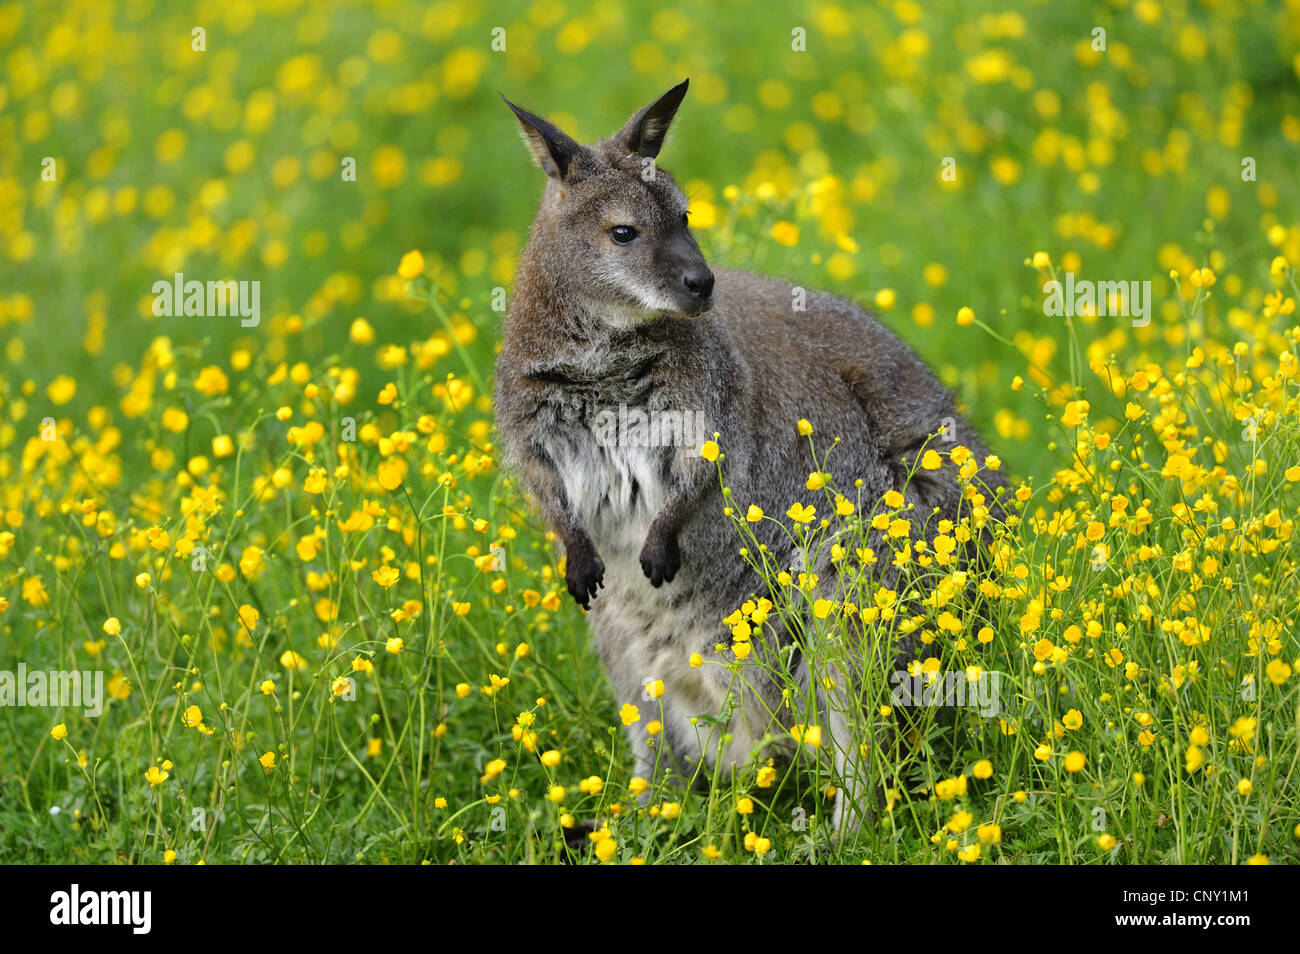 red-necked wallaby, Bennett�s Wallaby (Macropus rufogriseus, Wallabia rufogrisea), in a meadow Stock Photo